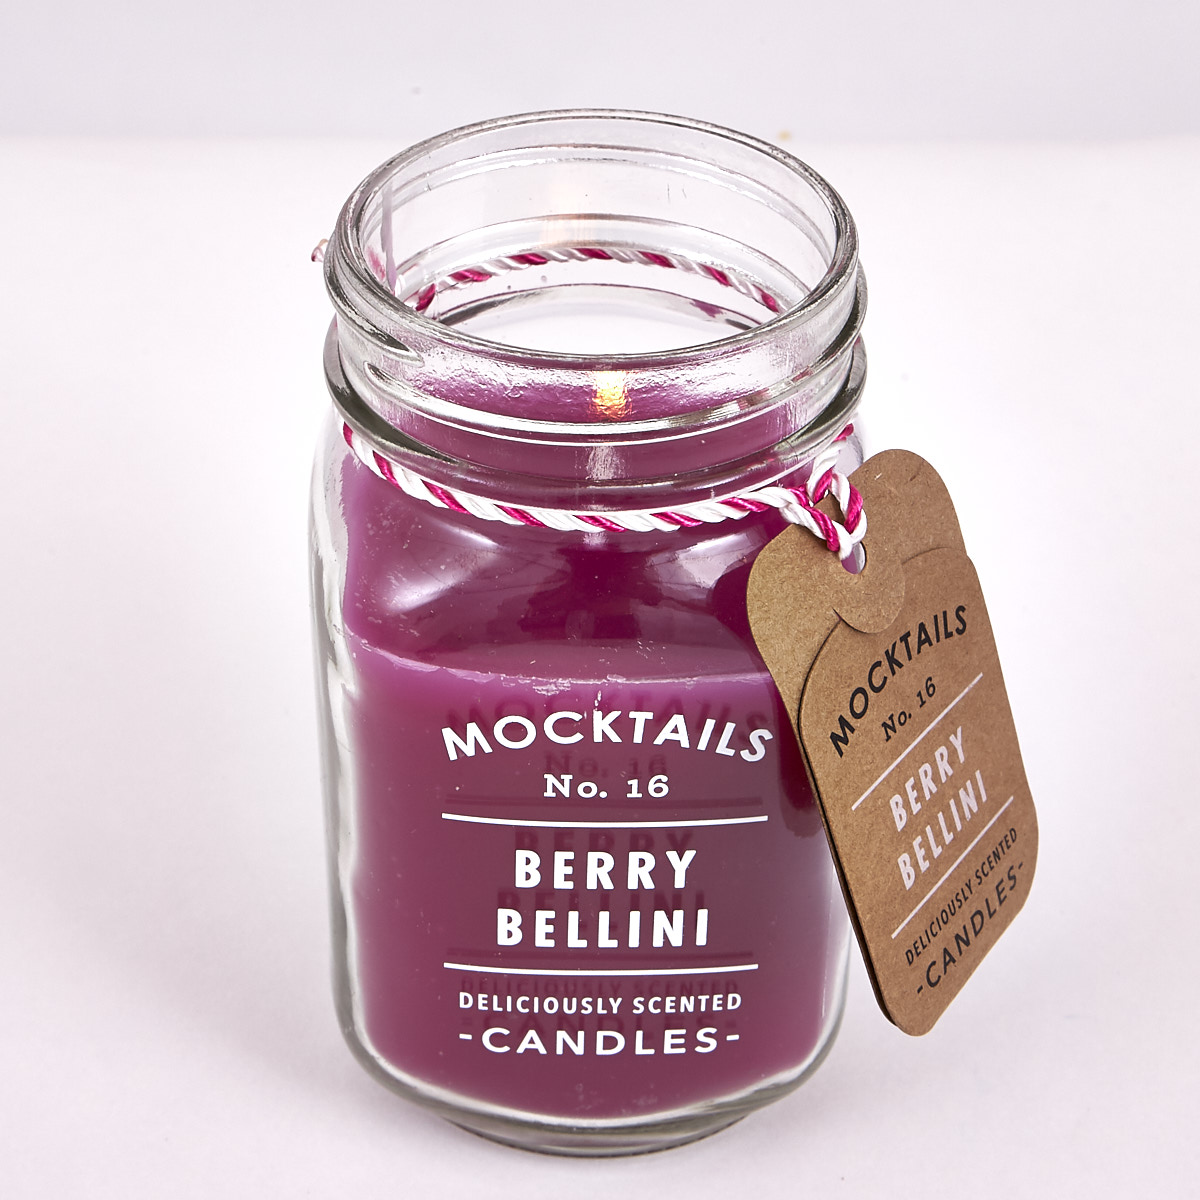 Mocktails Berry Bellini Scented Candle